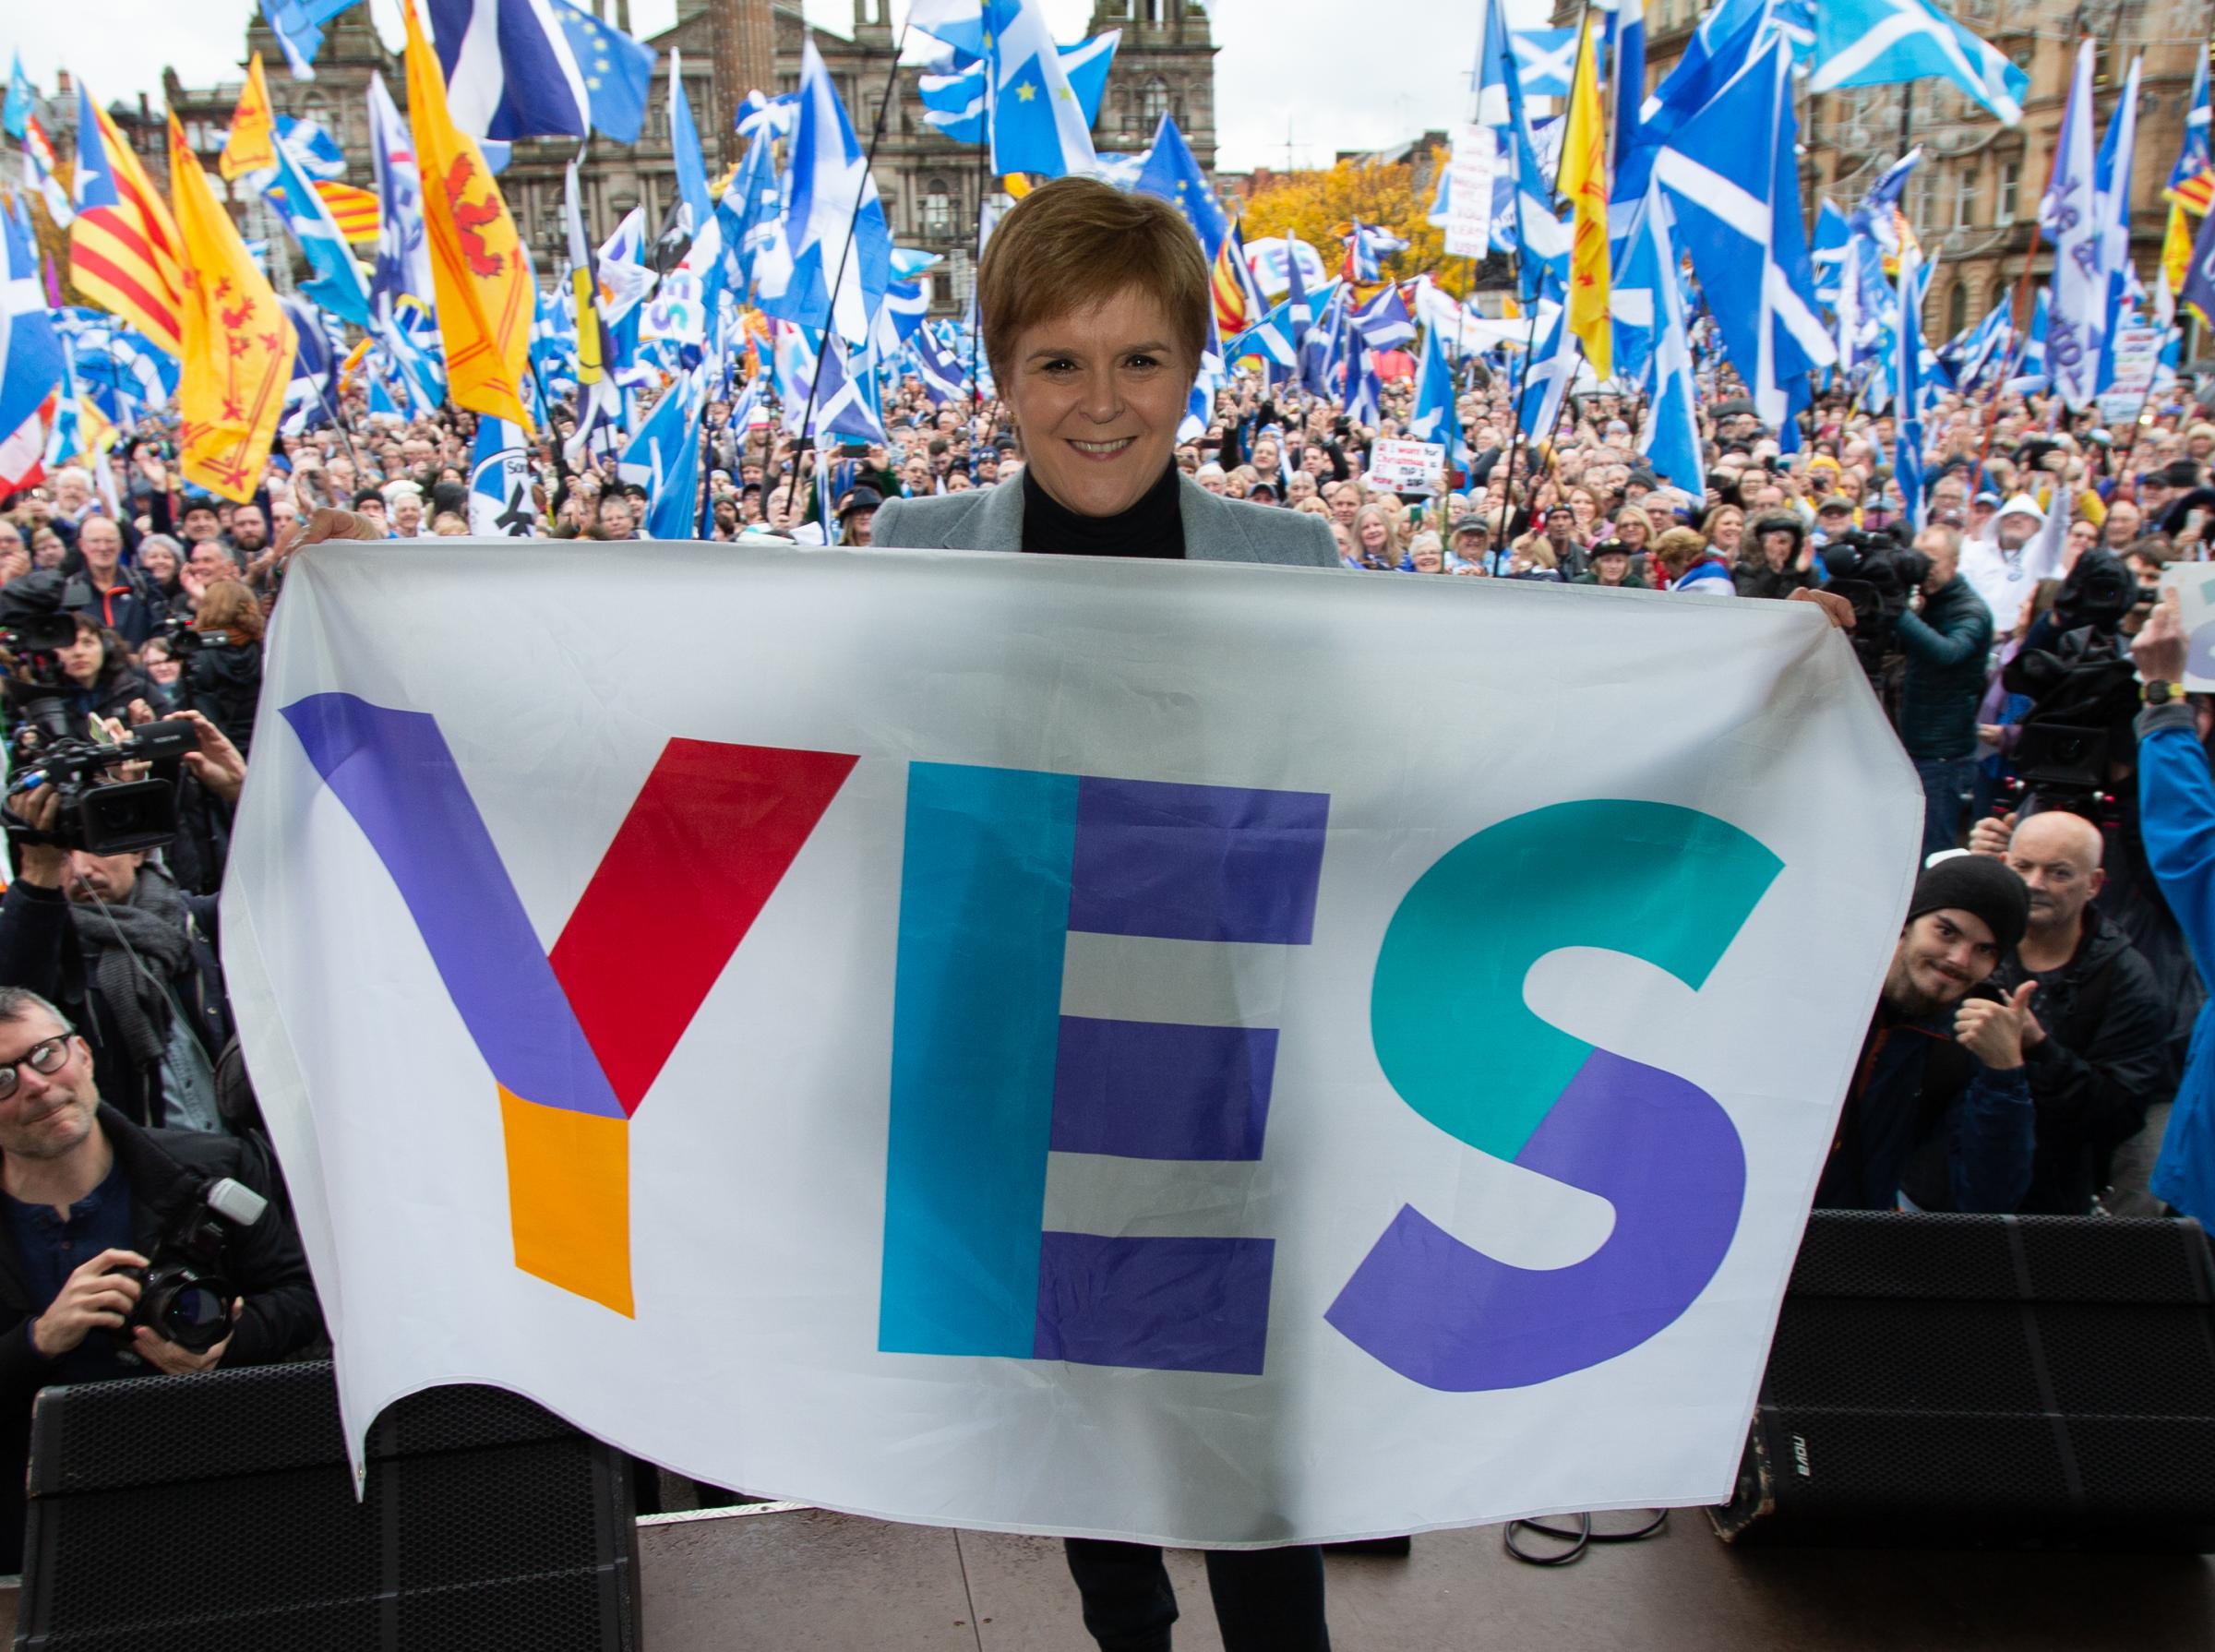 Nicola Sturgeon: It's time to make Scotland wealthier and fairer